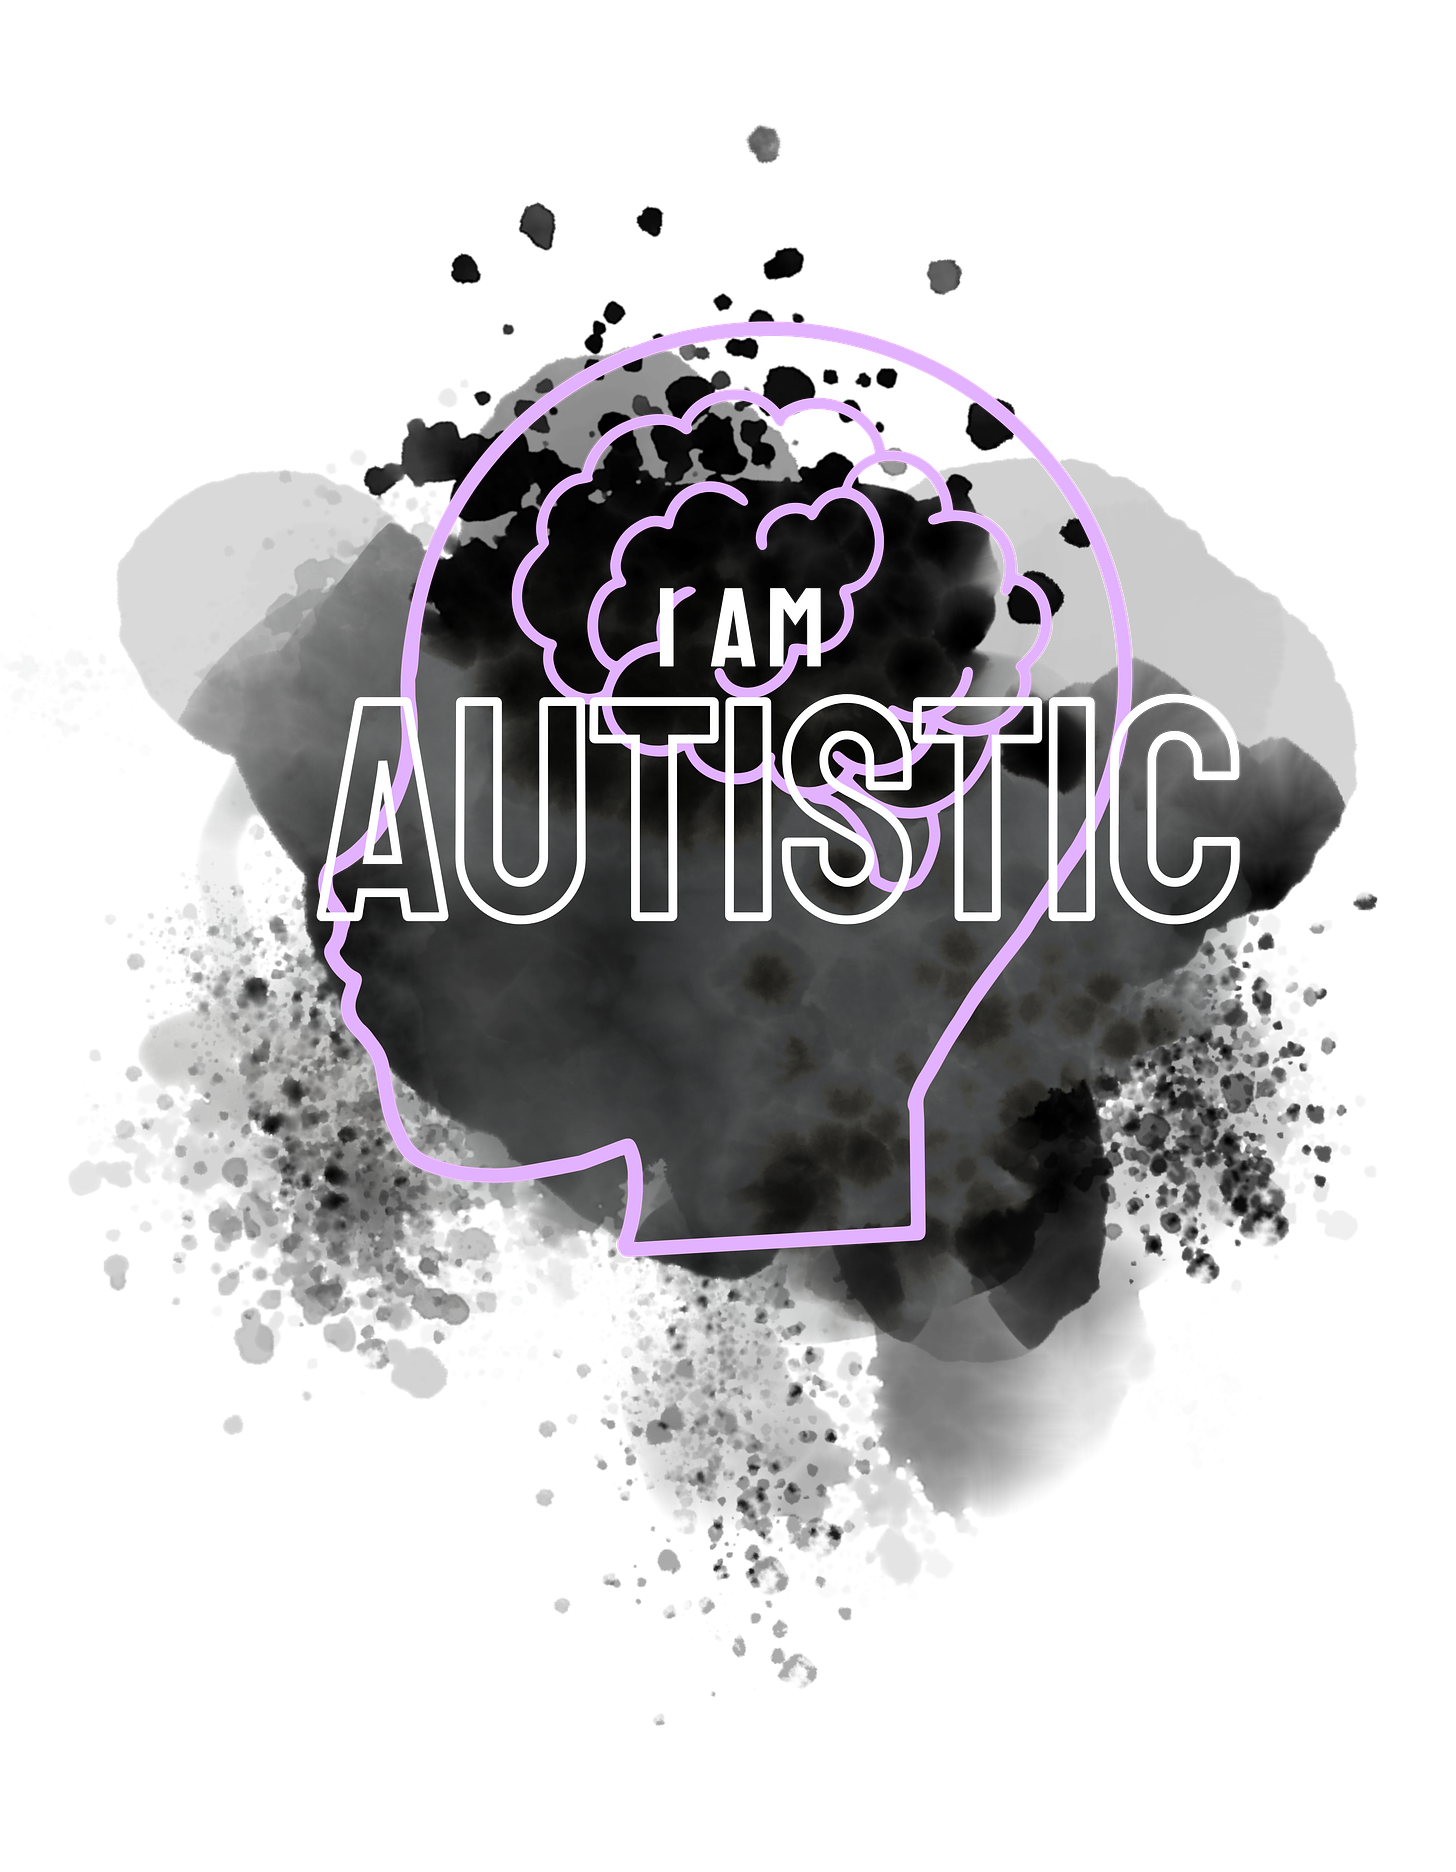 A lavender outline of a human head appears on top of several black and grey paint splashes with the words I am Autistic in white text